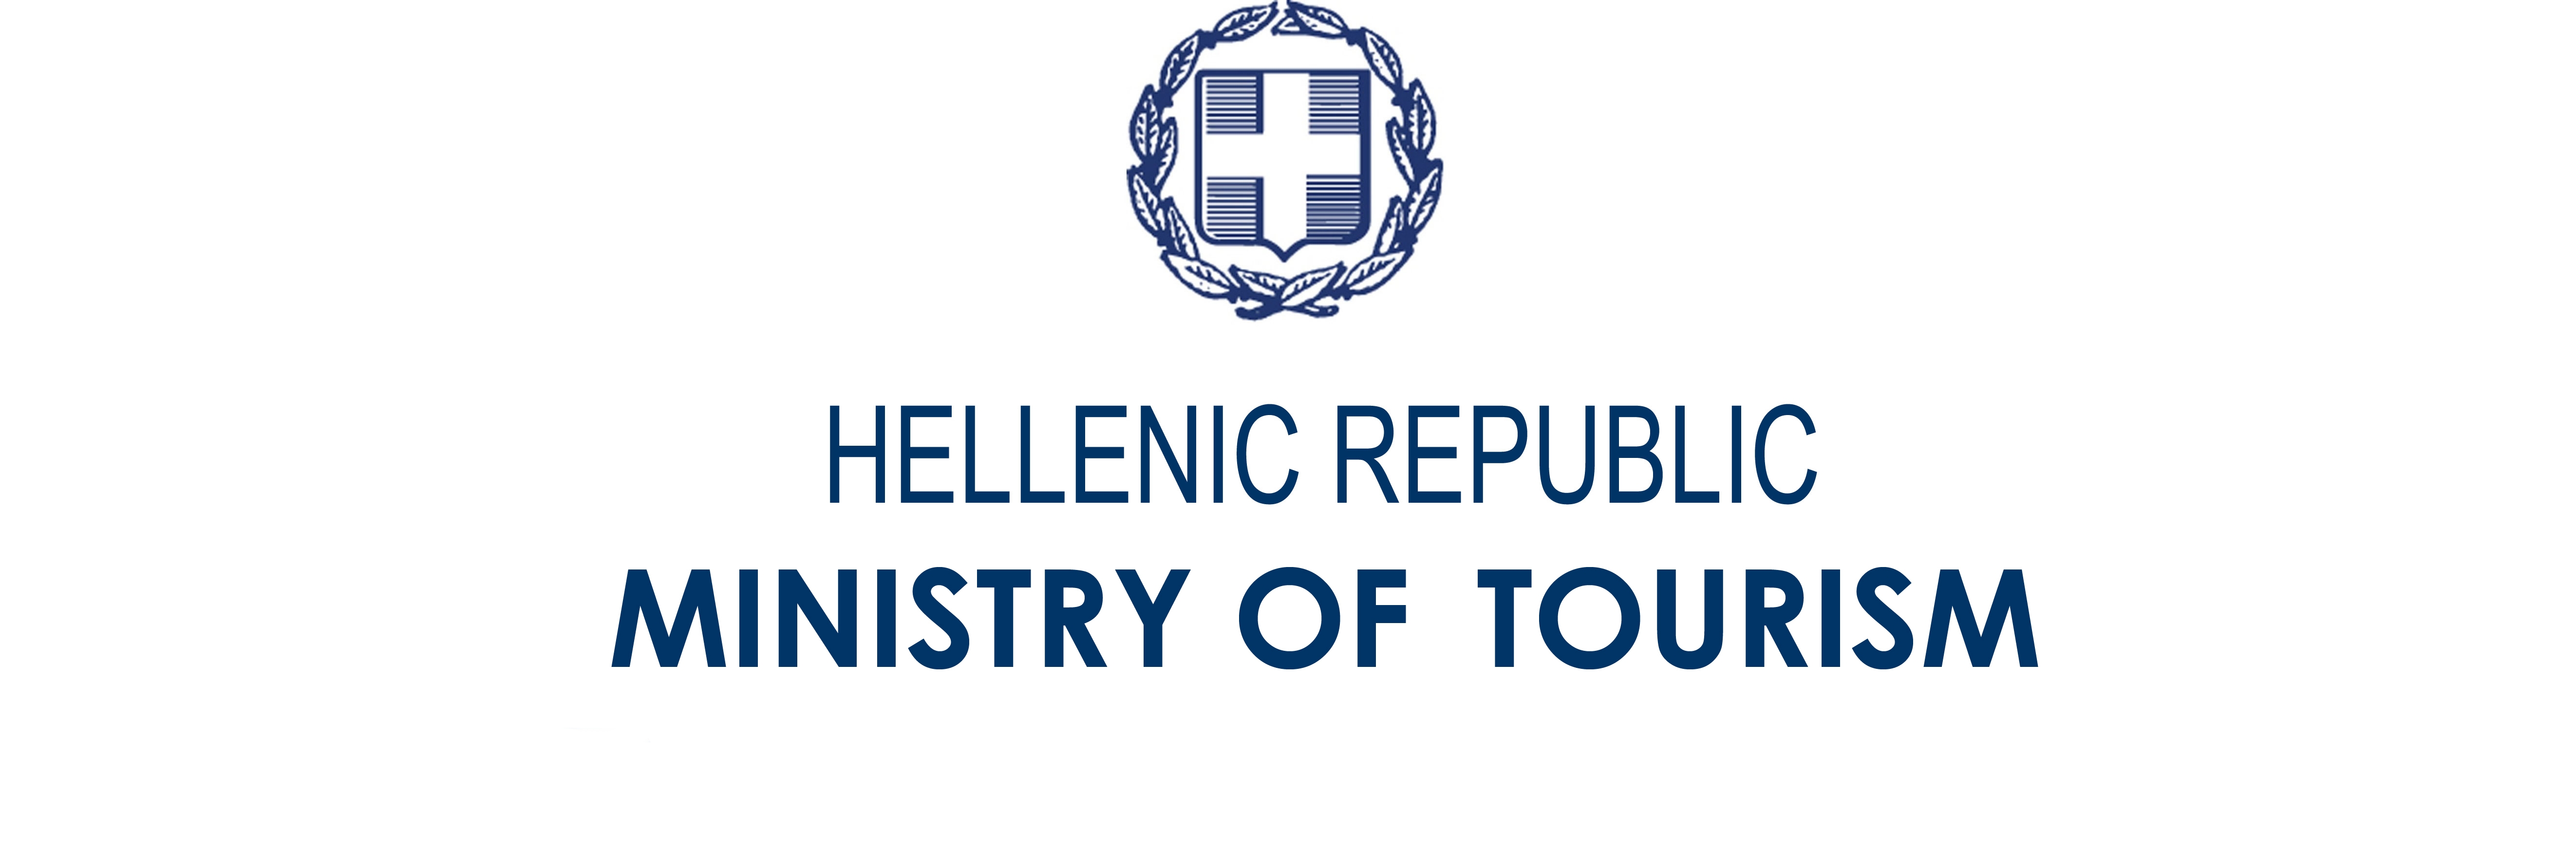 Hellenic Republic Ministry of Tourism Logo